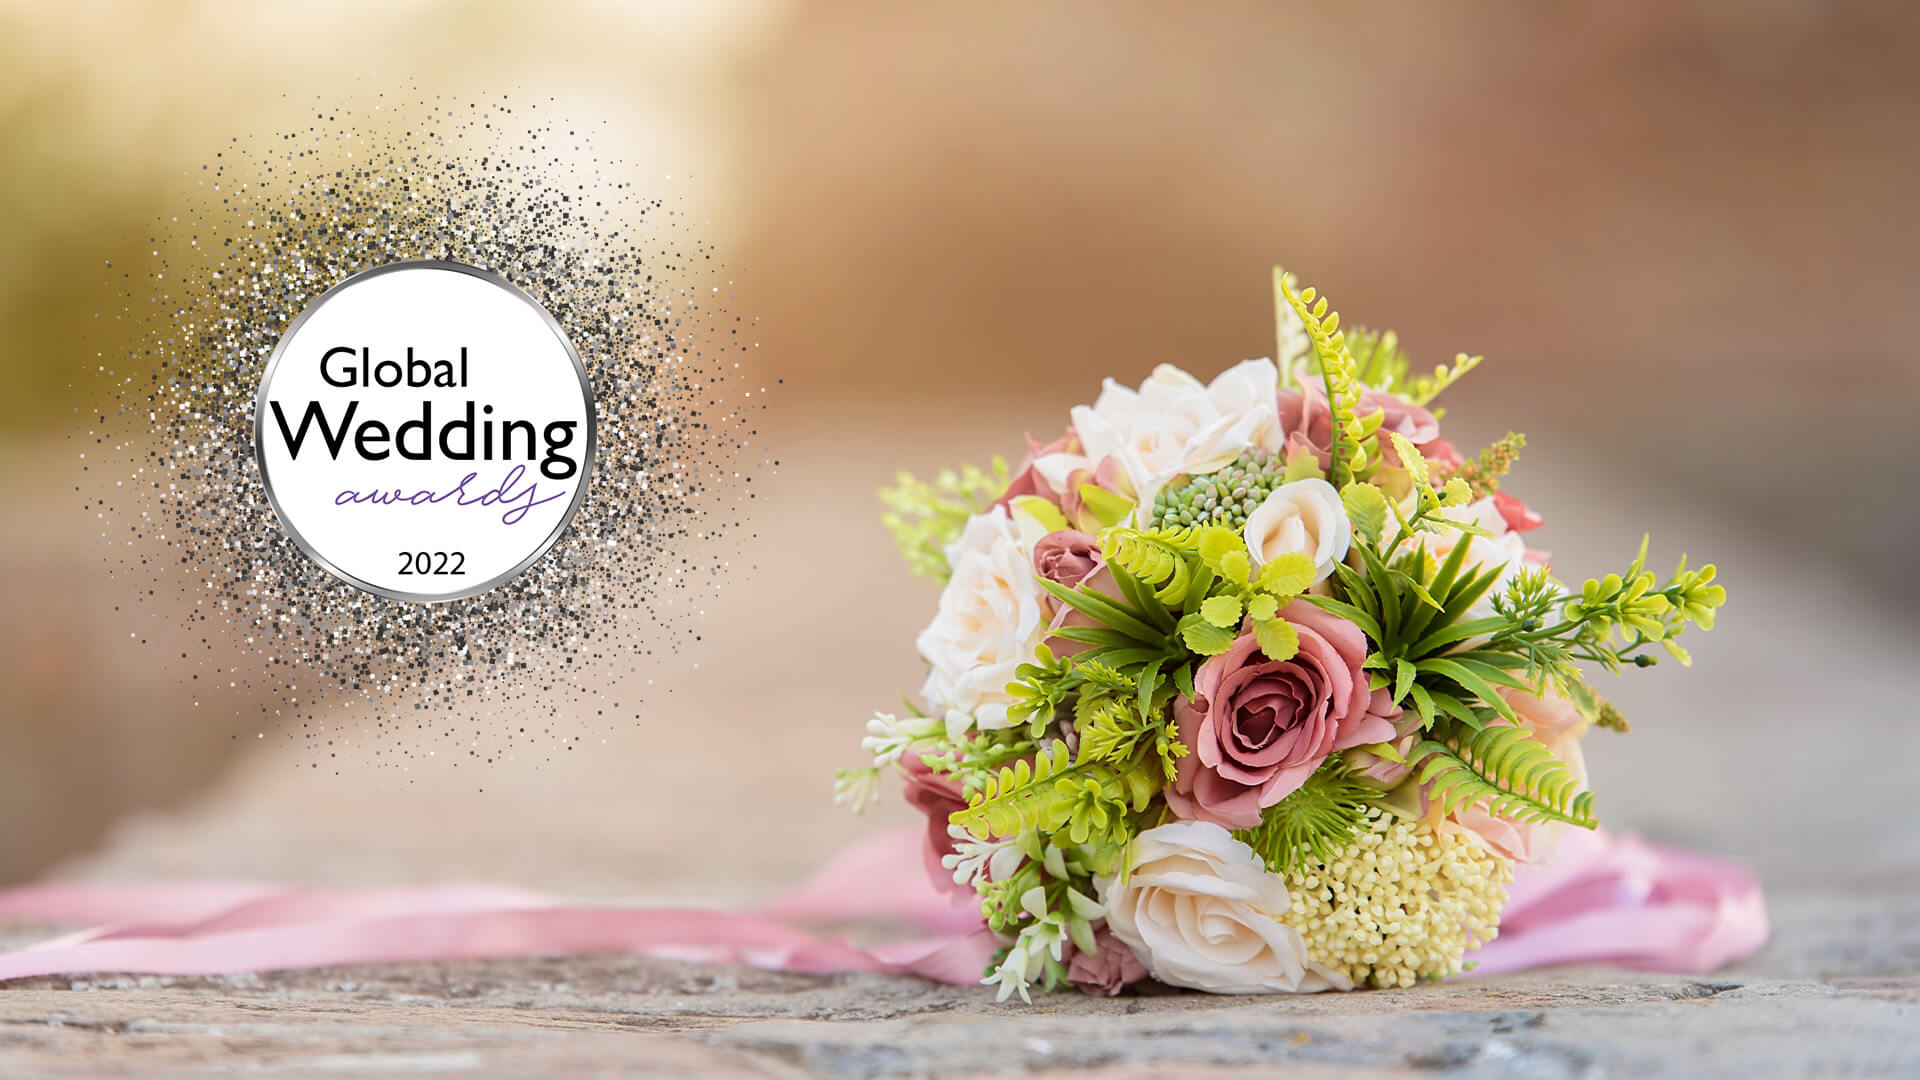 Wedding bouquet with the LUXlife Global Wedding Awards logo in the middle left